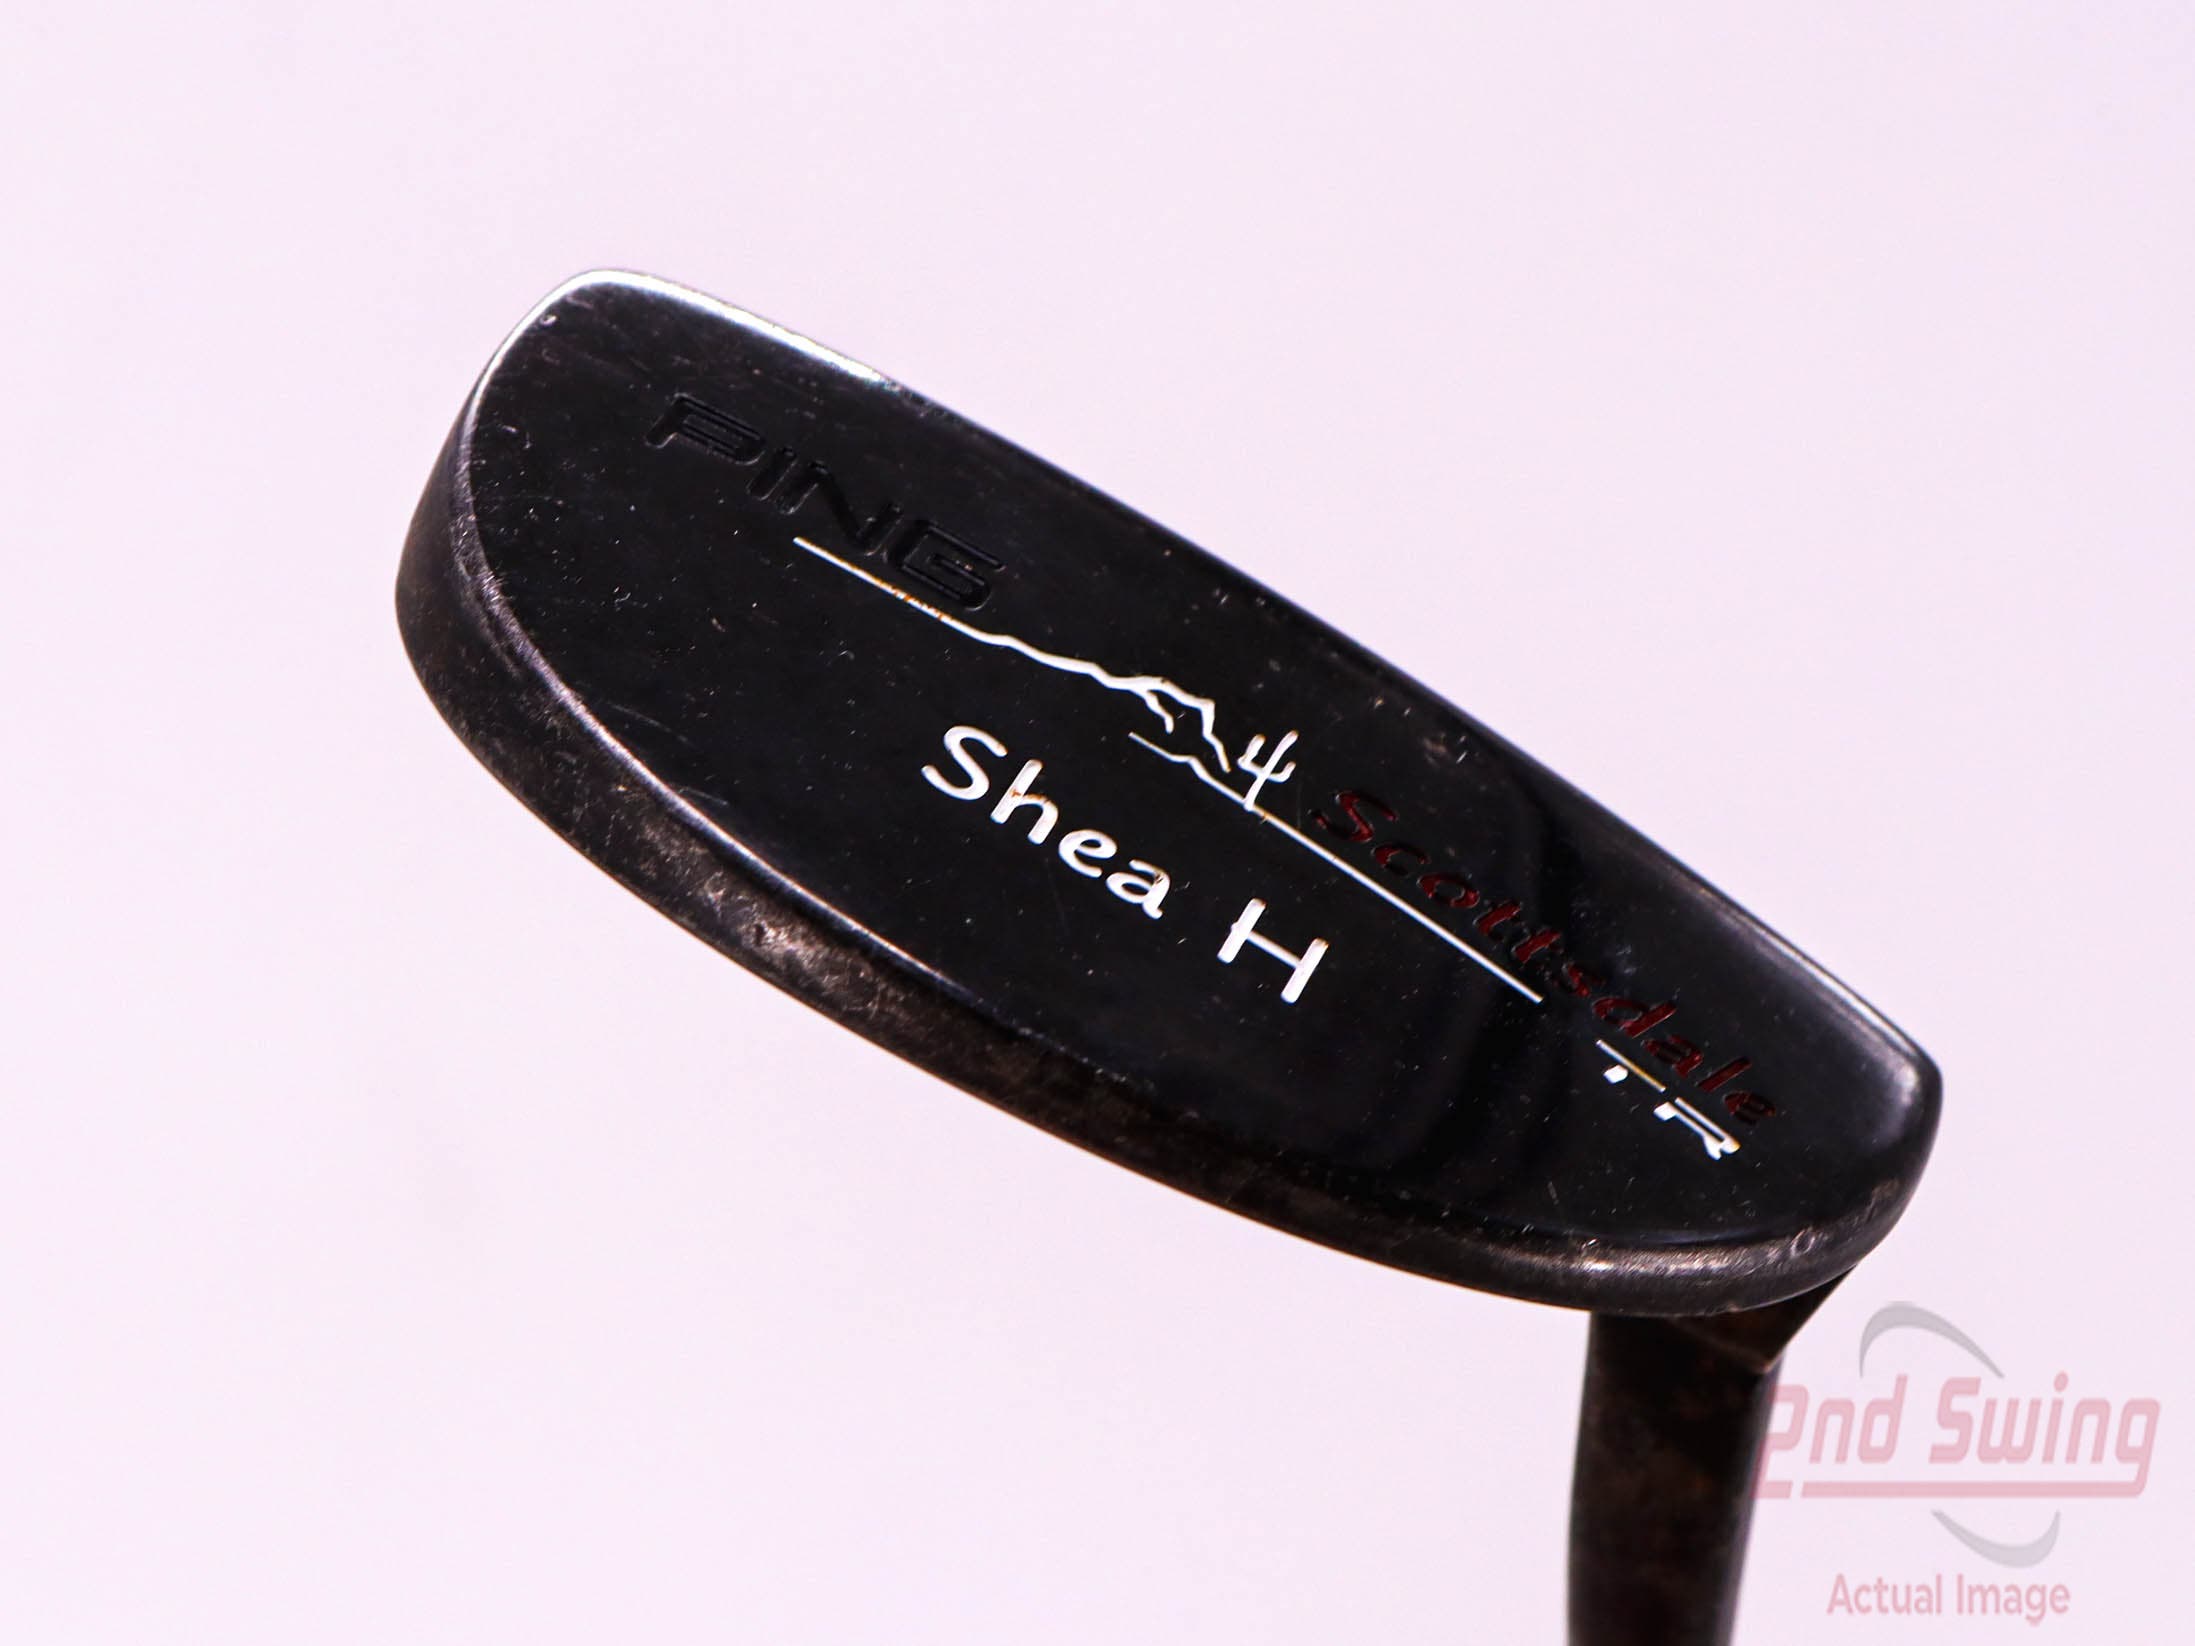 Ping Scottsdale TR Shea H Putter (D-22329529968) | 2nd Swing Golf